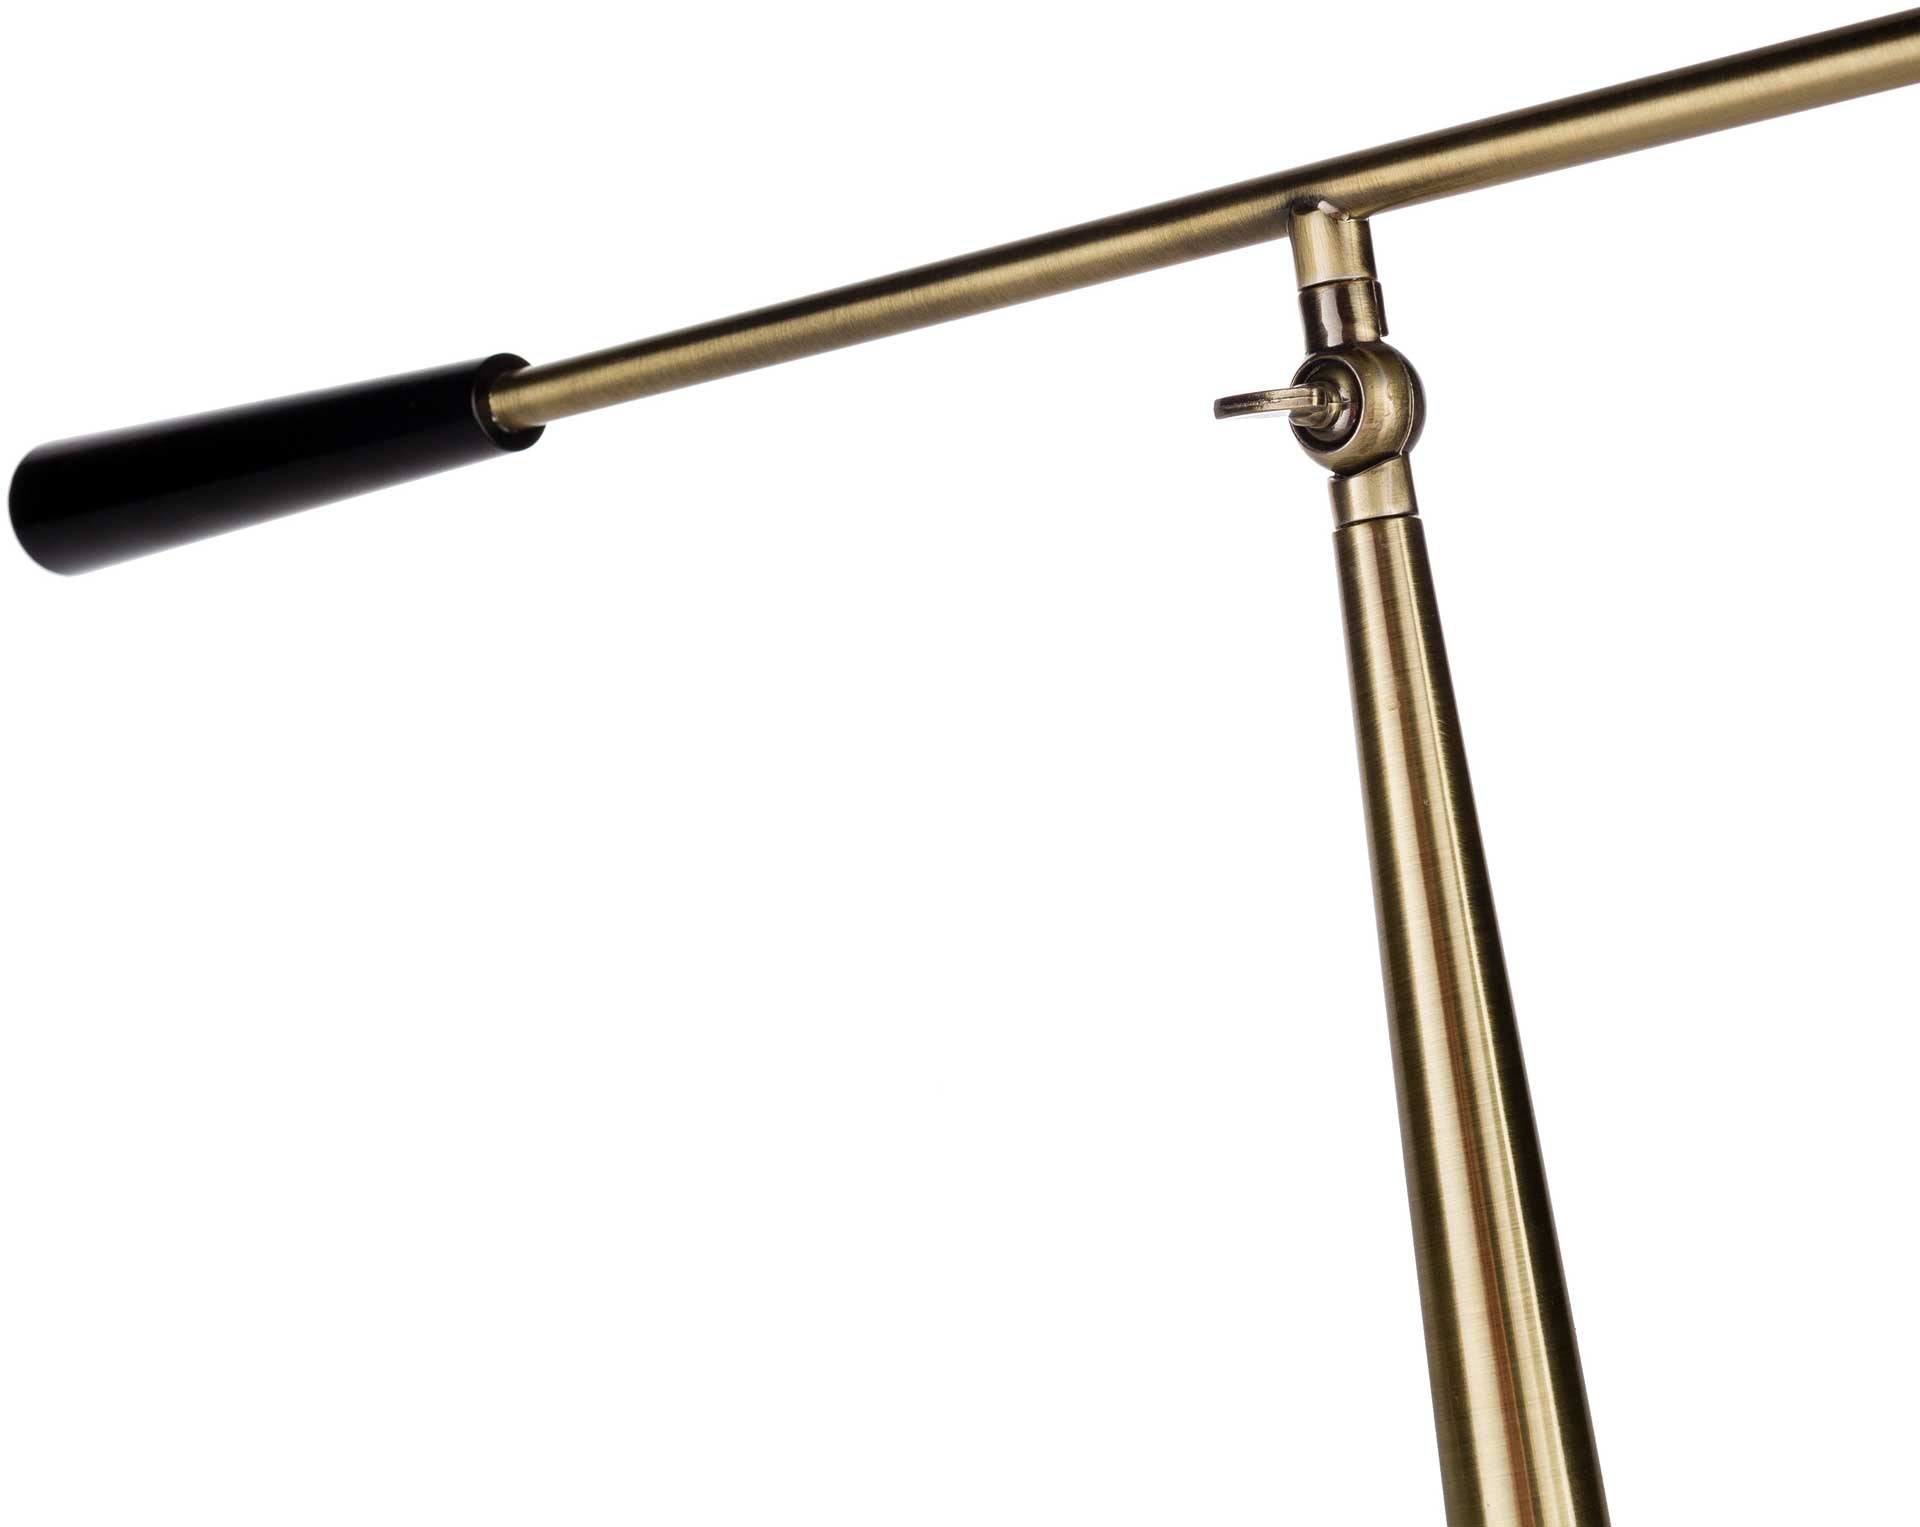 Tyree Table Lamp Black/Gold